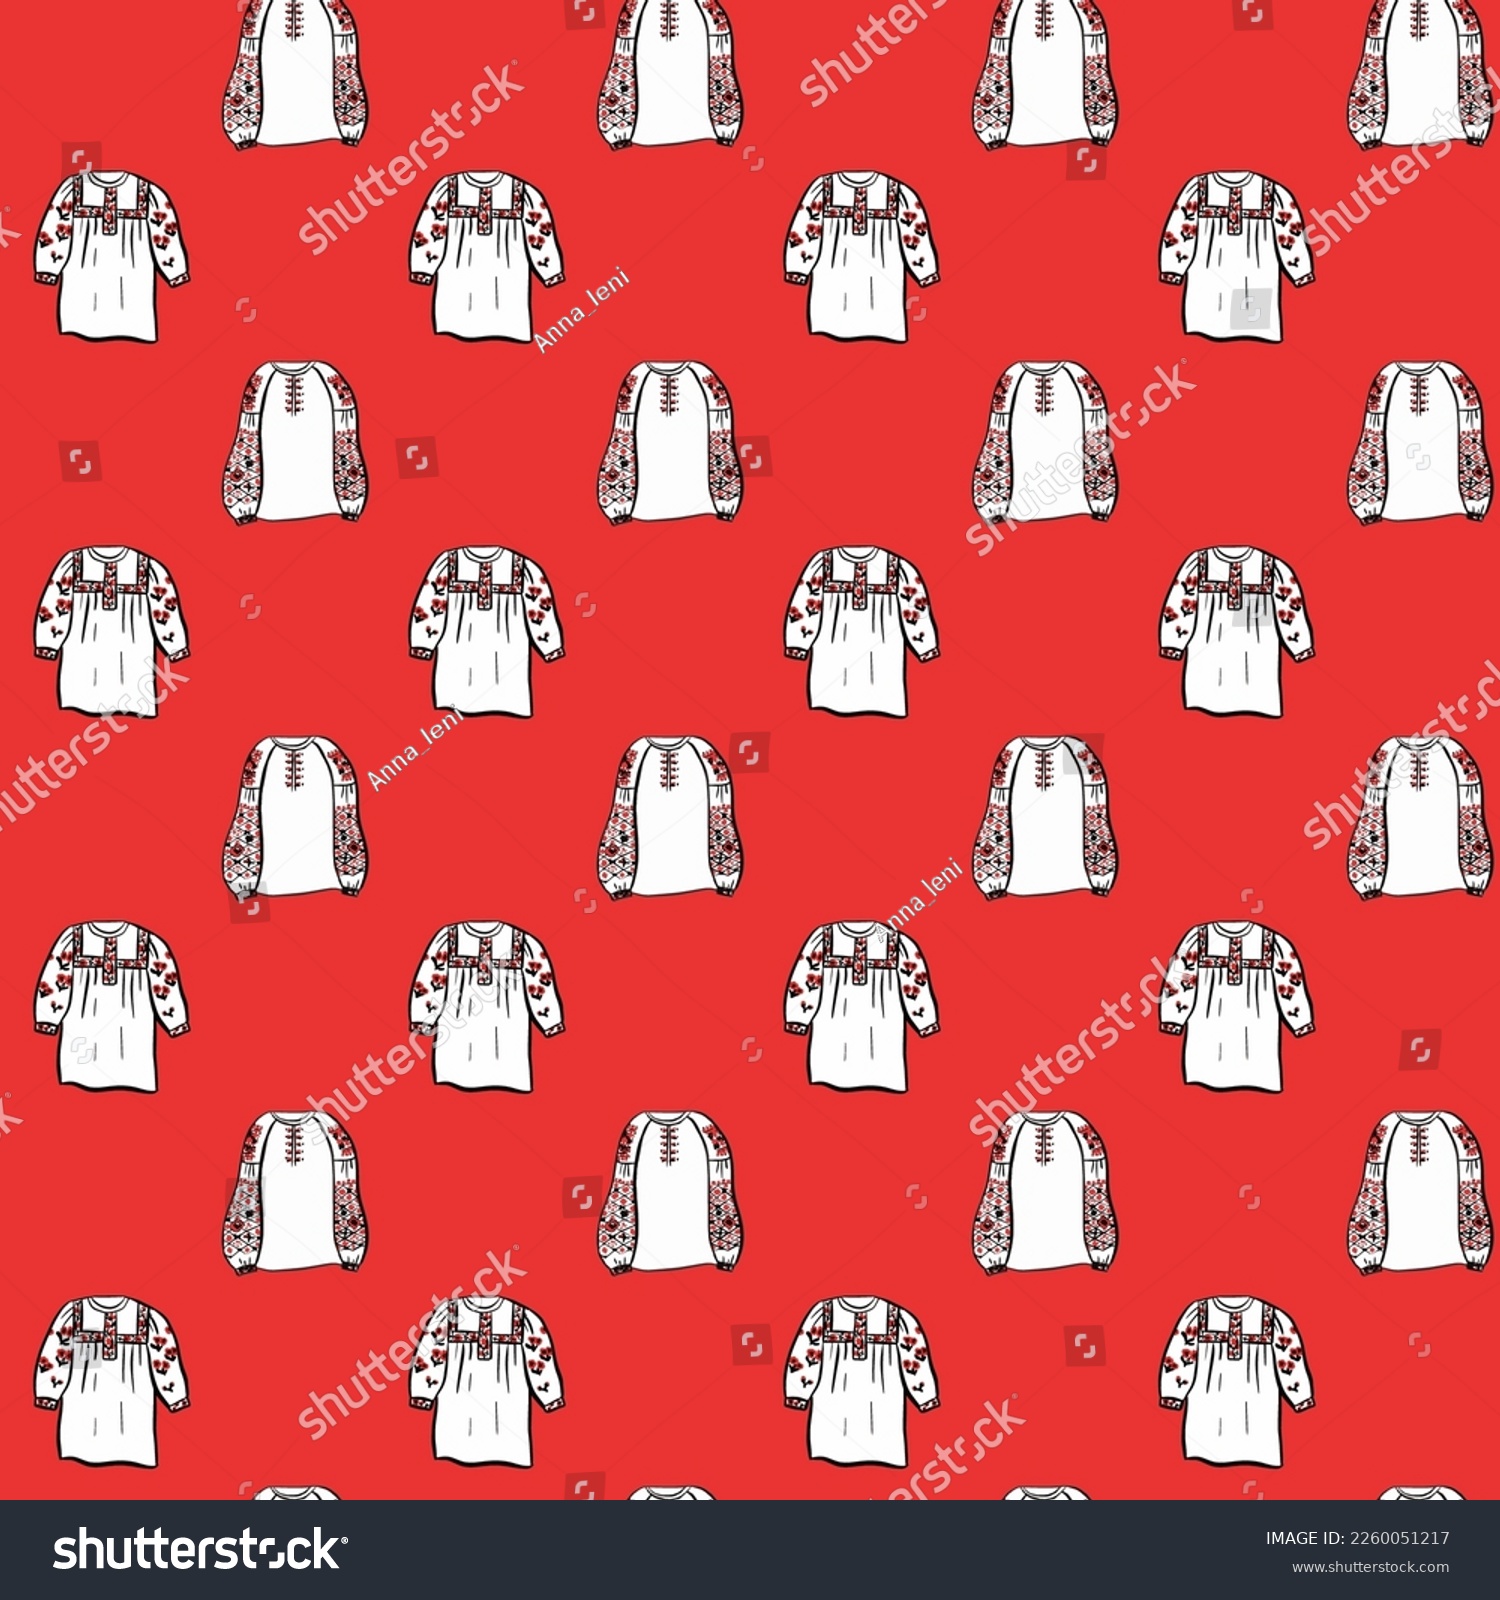 SVG of Ukraine Embroidery Shirt Seamless Pattern. Vector Illustration of Sketch Doodle Hand drawn Ukrainian Cultural Clothes. svg